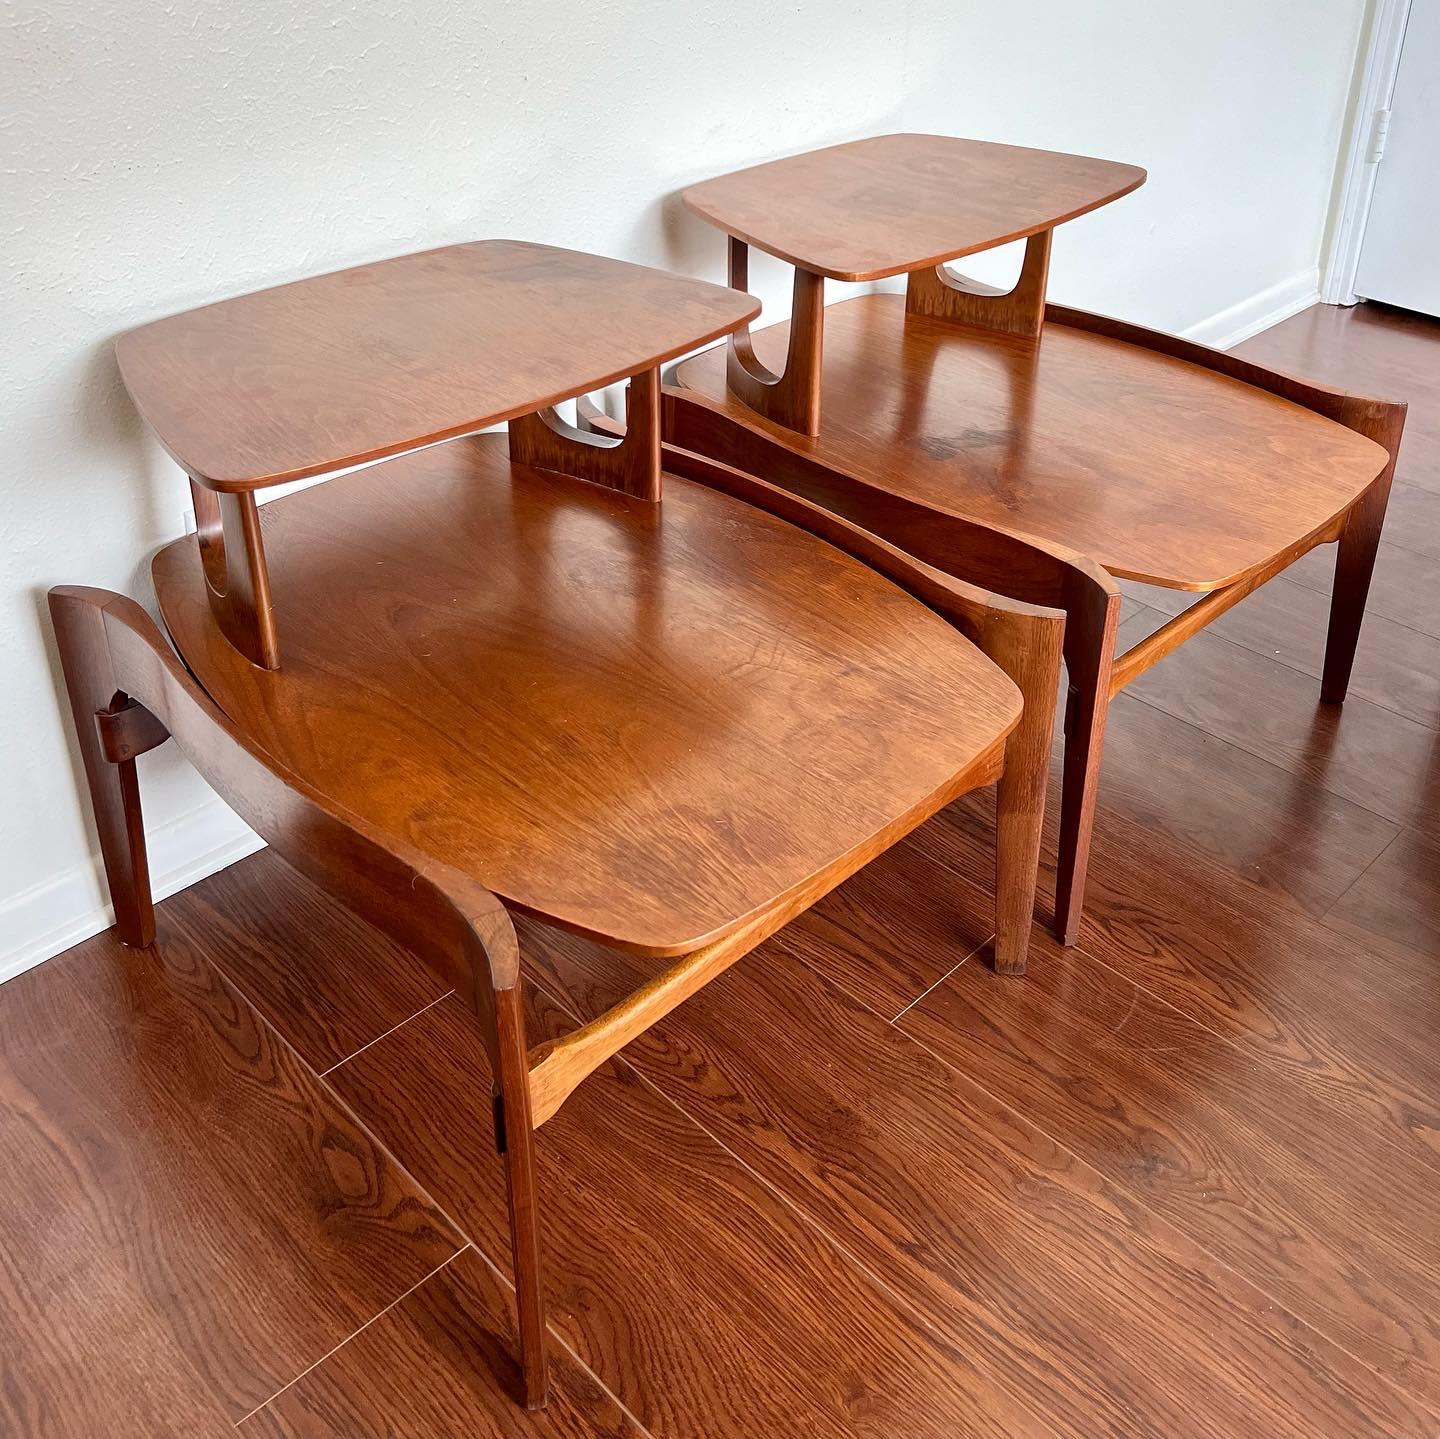 This listing is just for the side tables. 

Mid-Century Modern iconic table set. A stunning contoured walnut frame suspends a gorgeous piece of original travertine for the coffee table. Stamped “Made in Italy.”The side tables are solid walnut, and